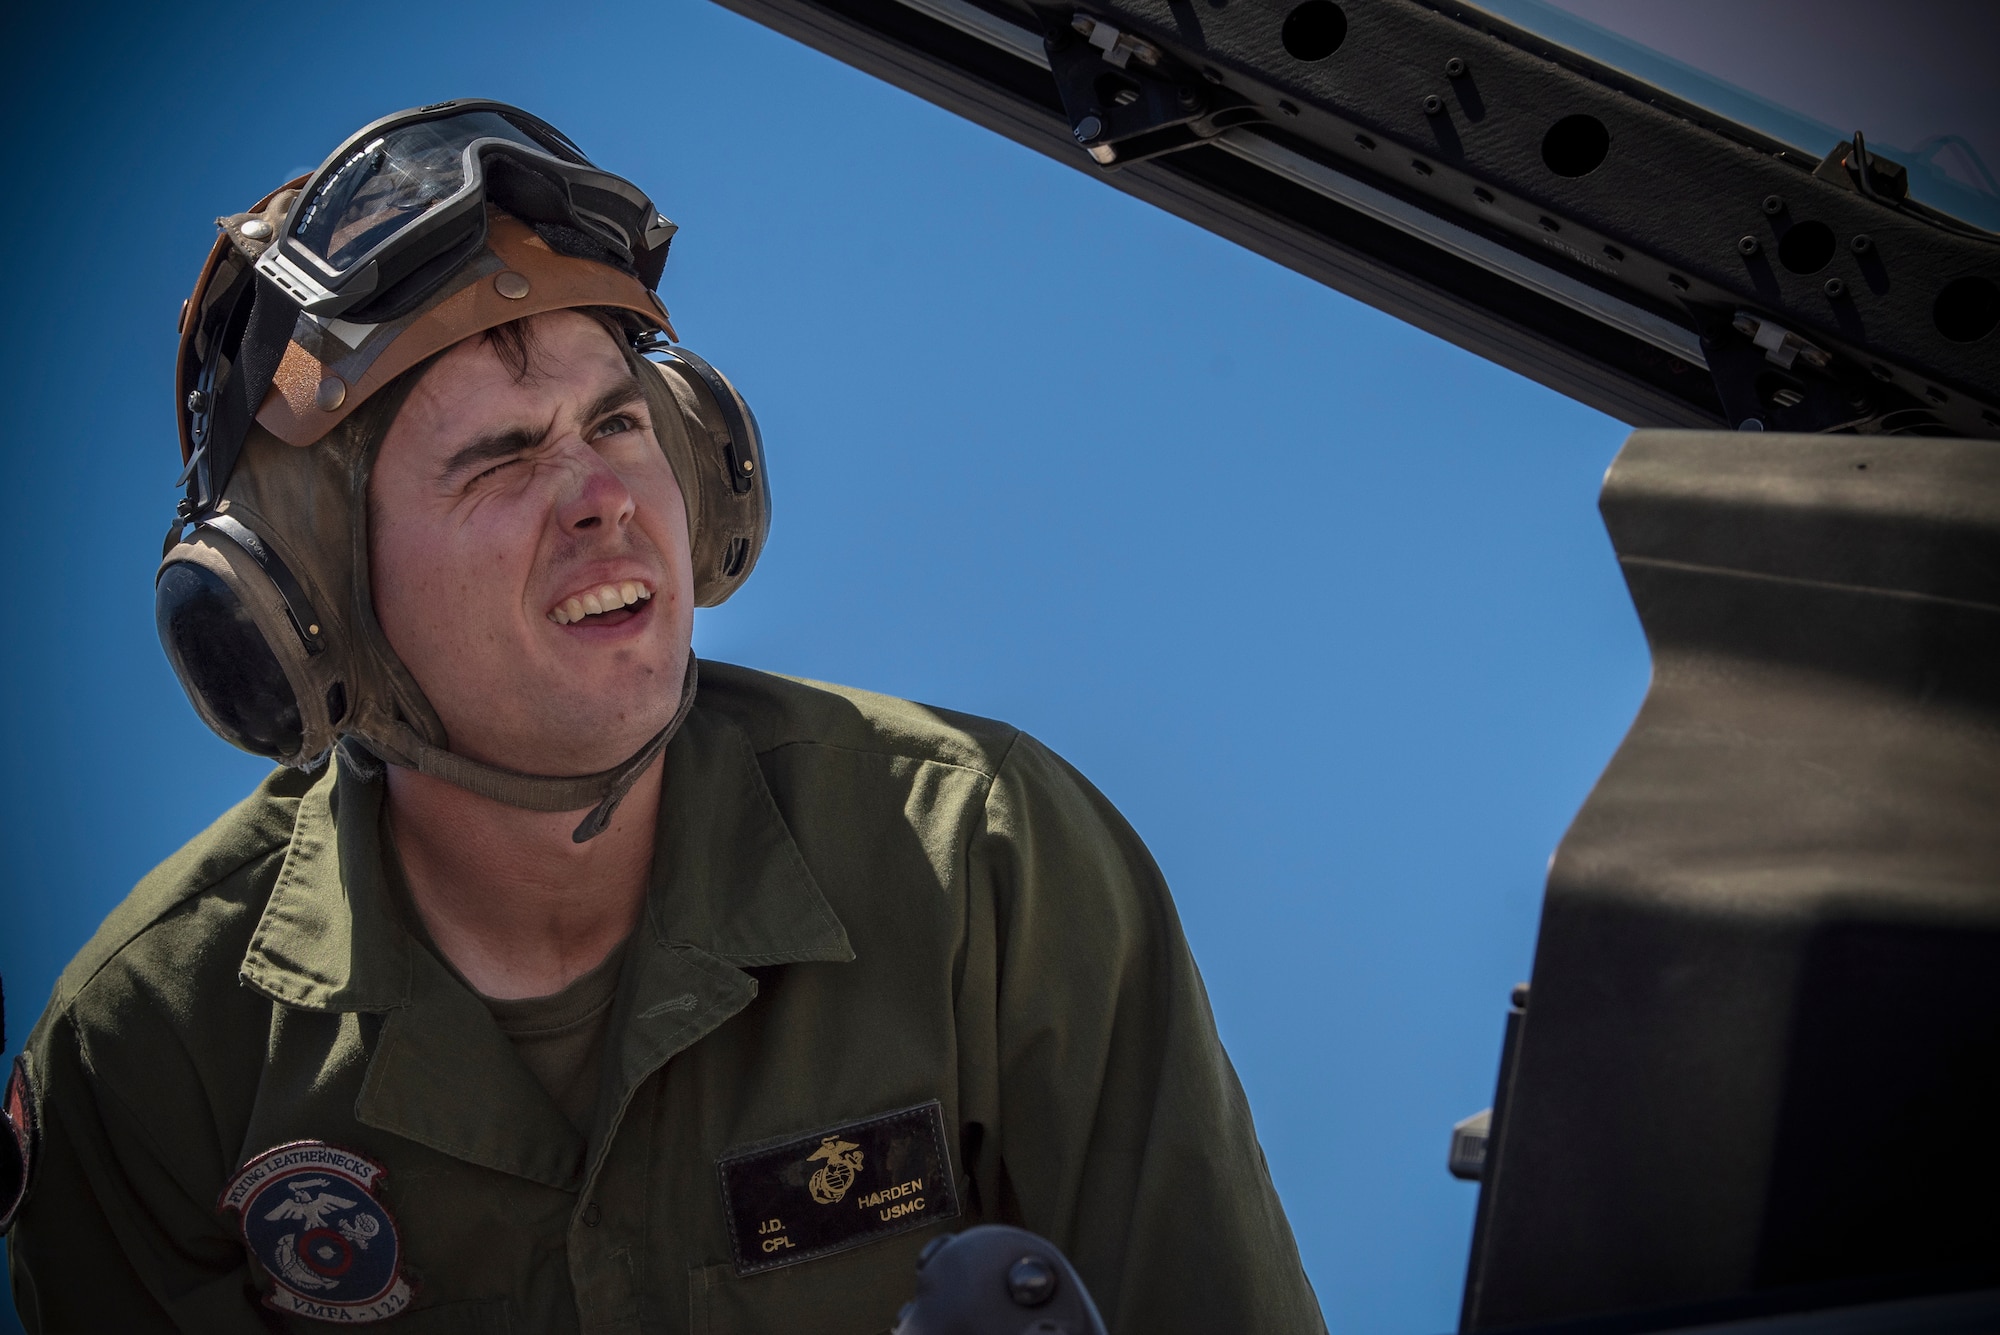 Airman looks into aircraft.